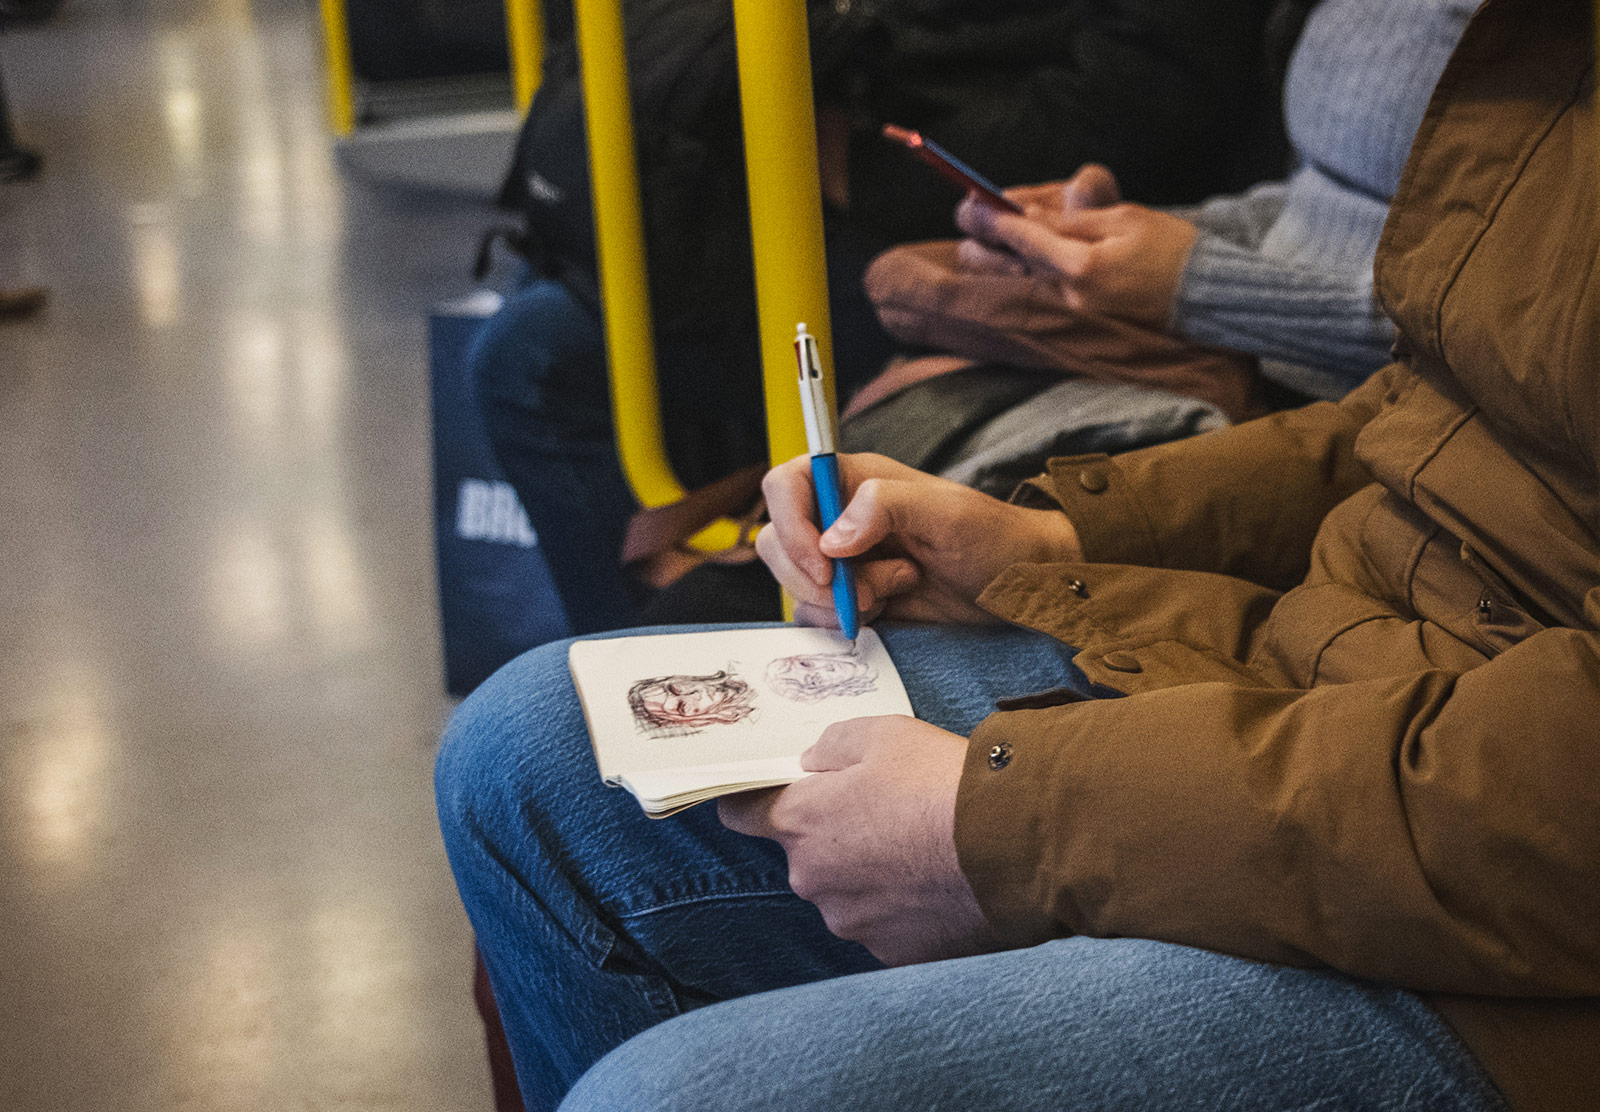 Man sketching faces on train